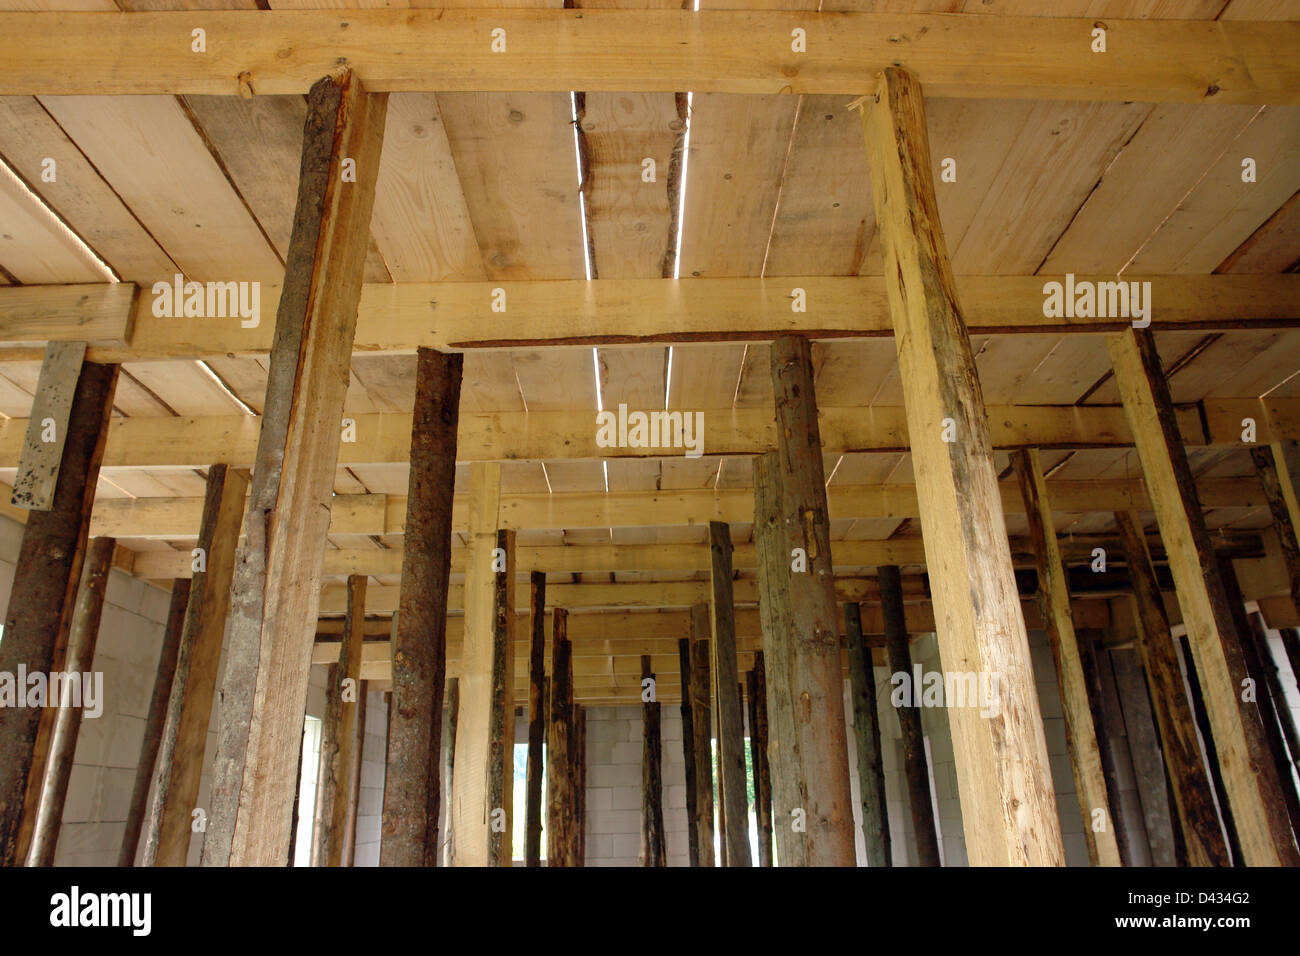 Wooden shuttering supported by props being ready for casting concrete slab Stock Photo